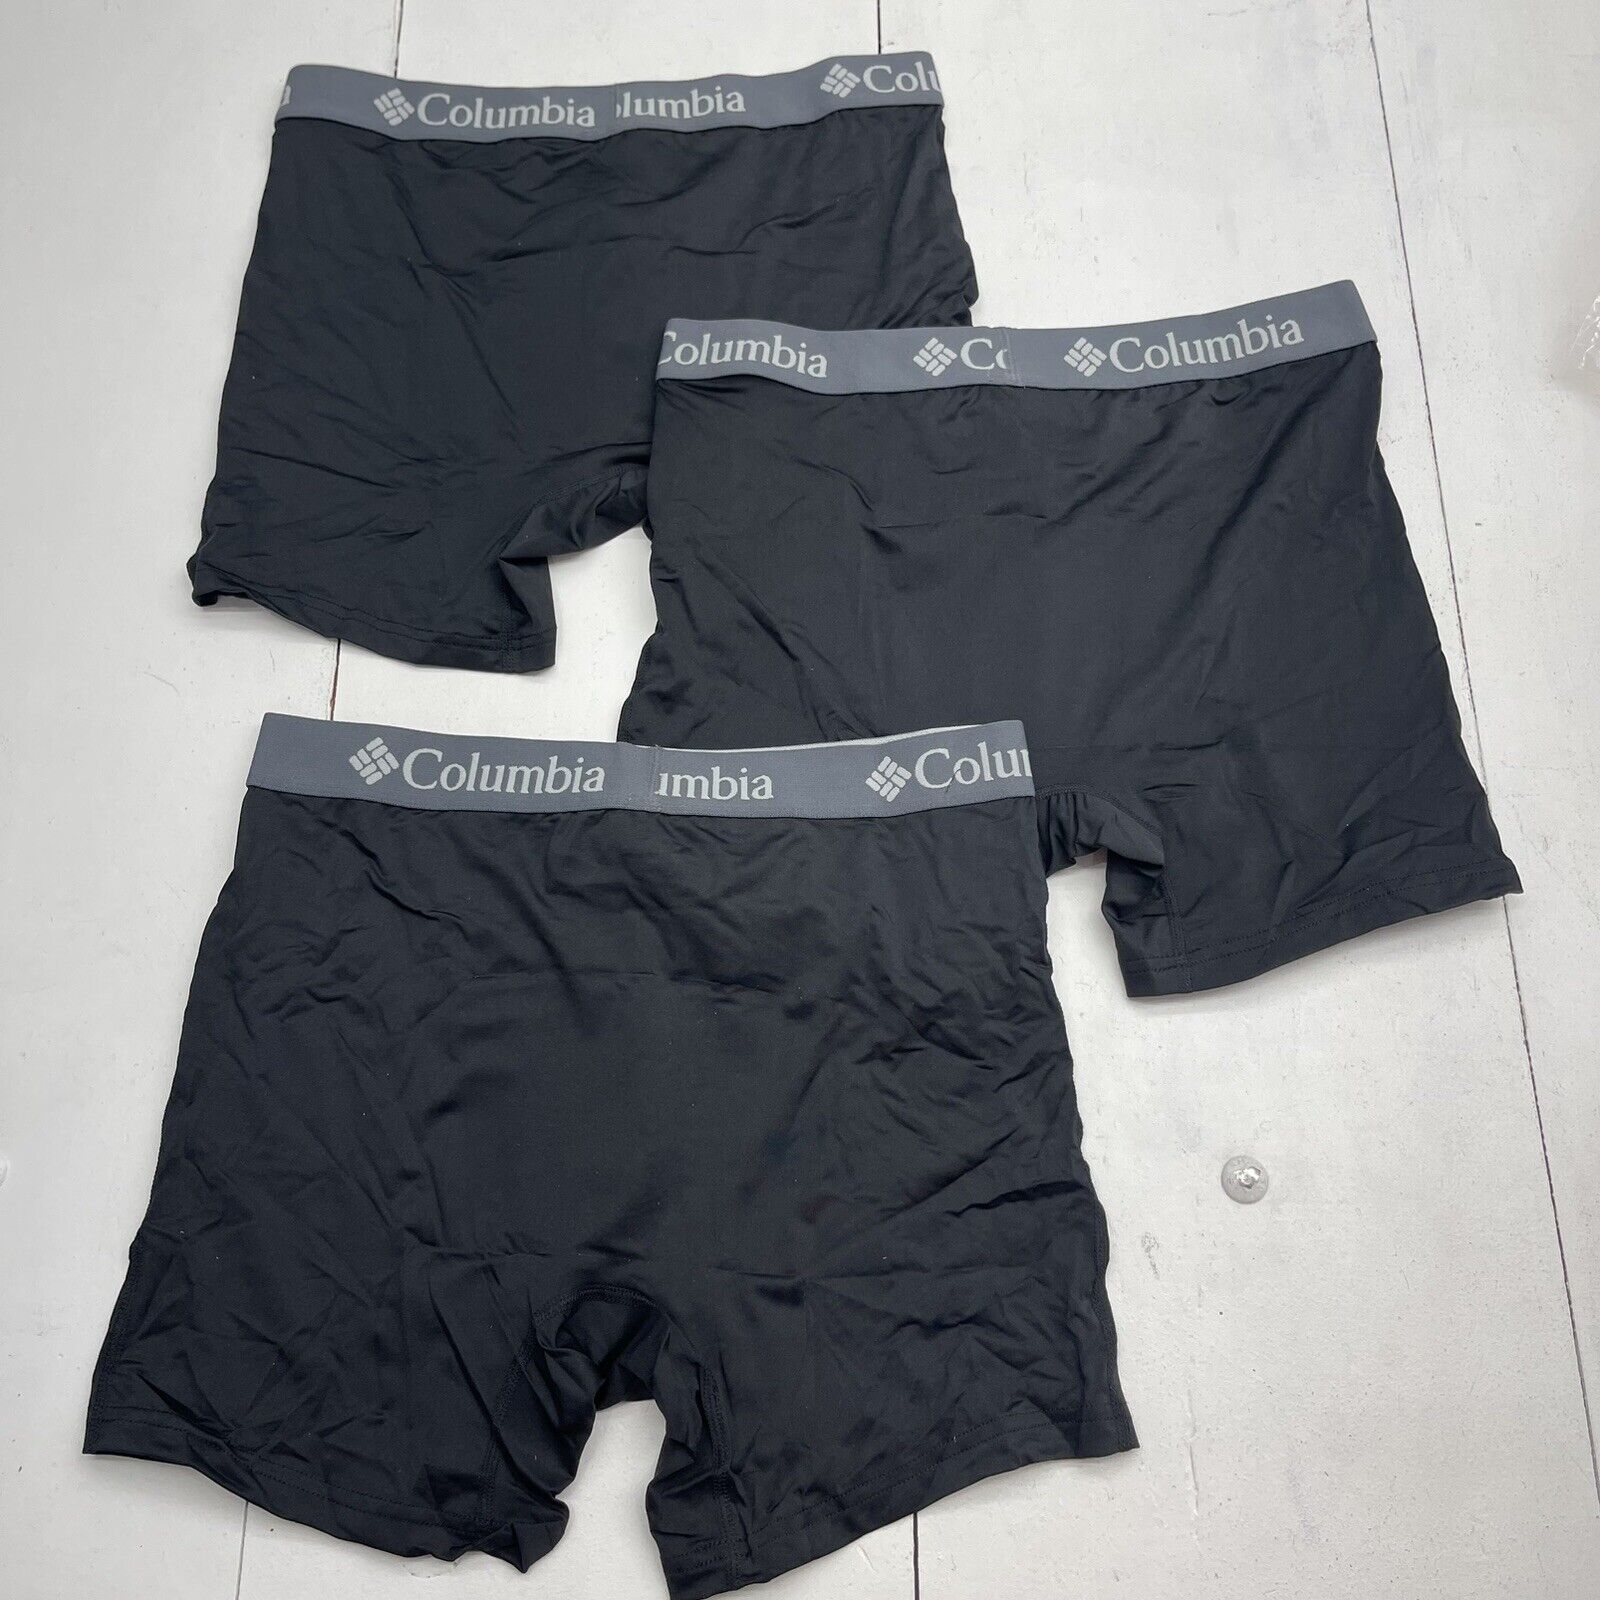 Columbia High Performance Stretch Boxer Briefs Black 3 Pack Mens Large -  beyond exchange